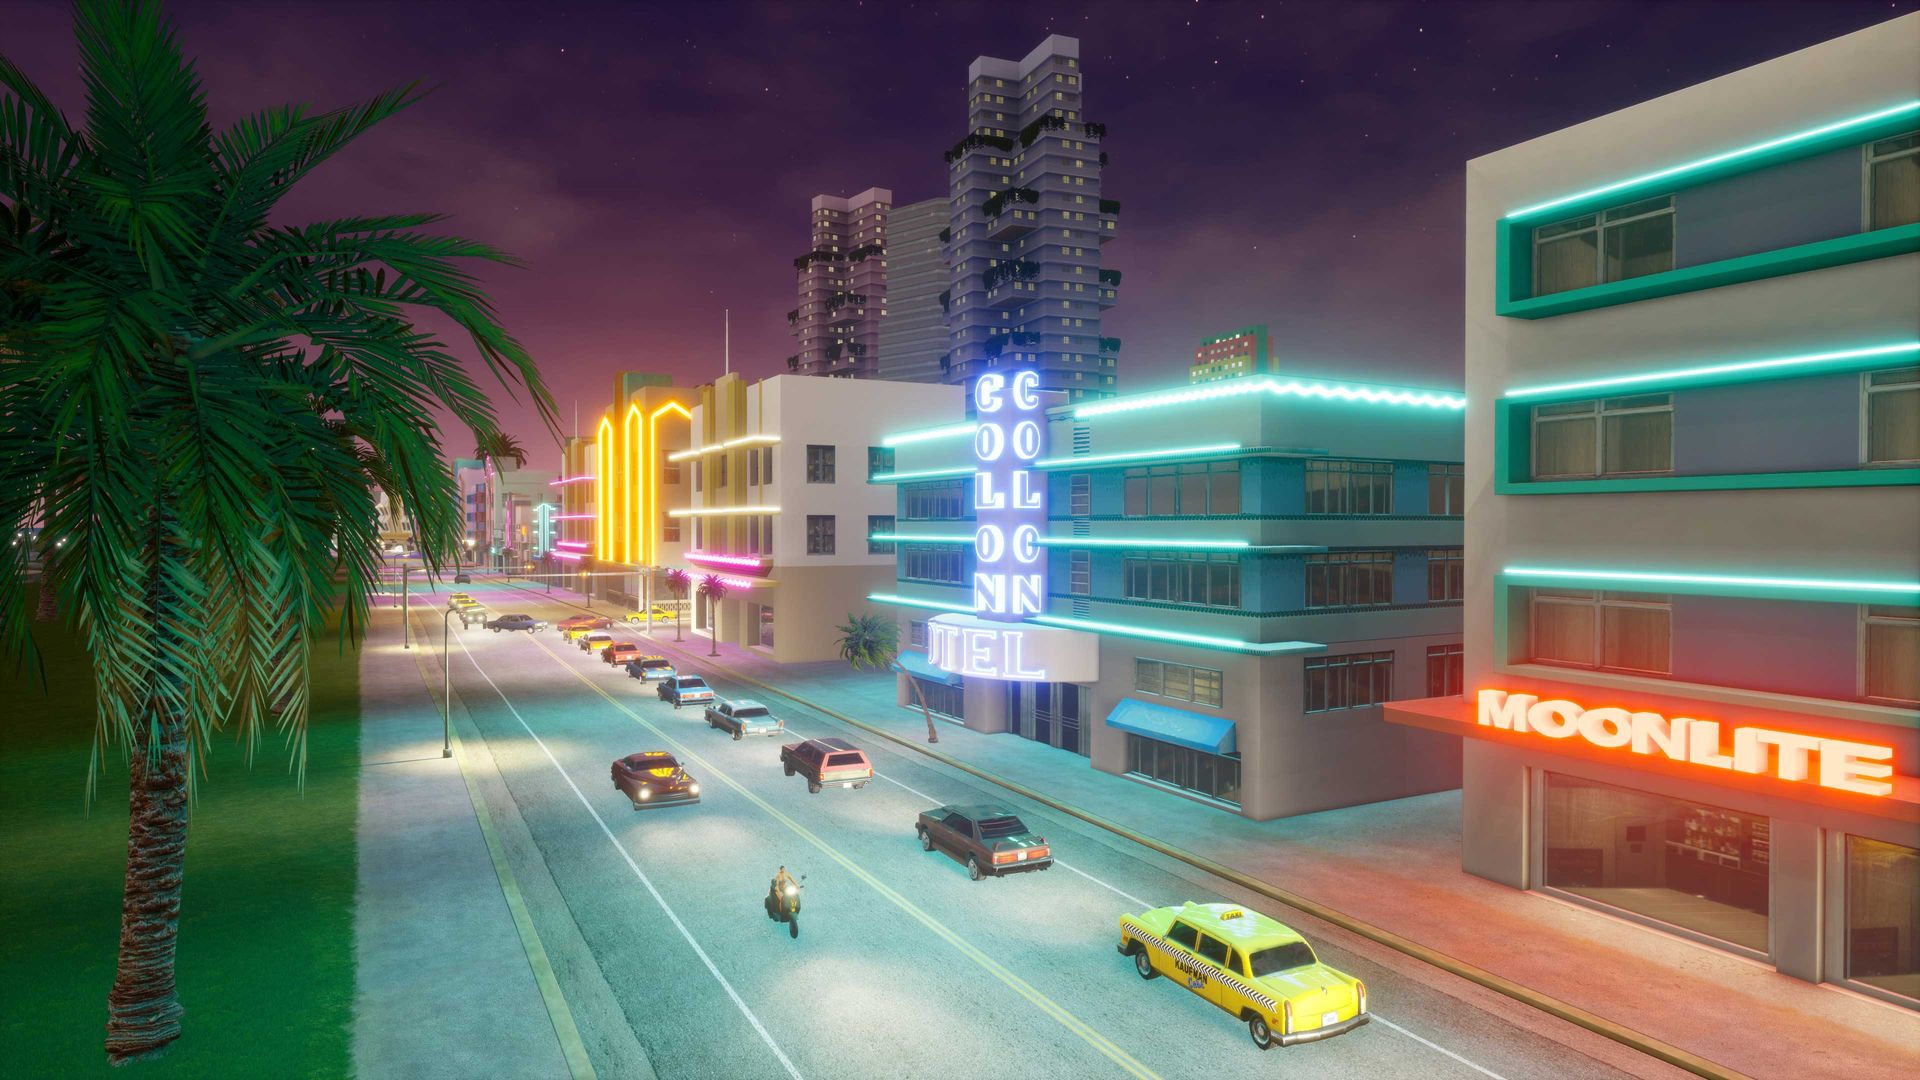 Video game screenshot of a palm-tree-lined city street at night